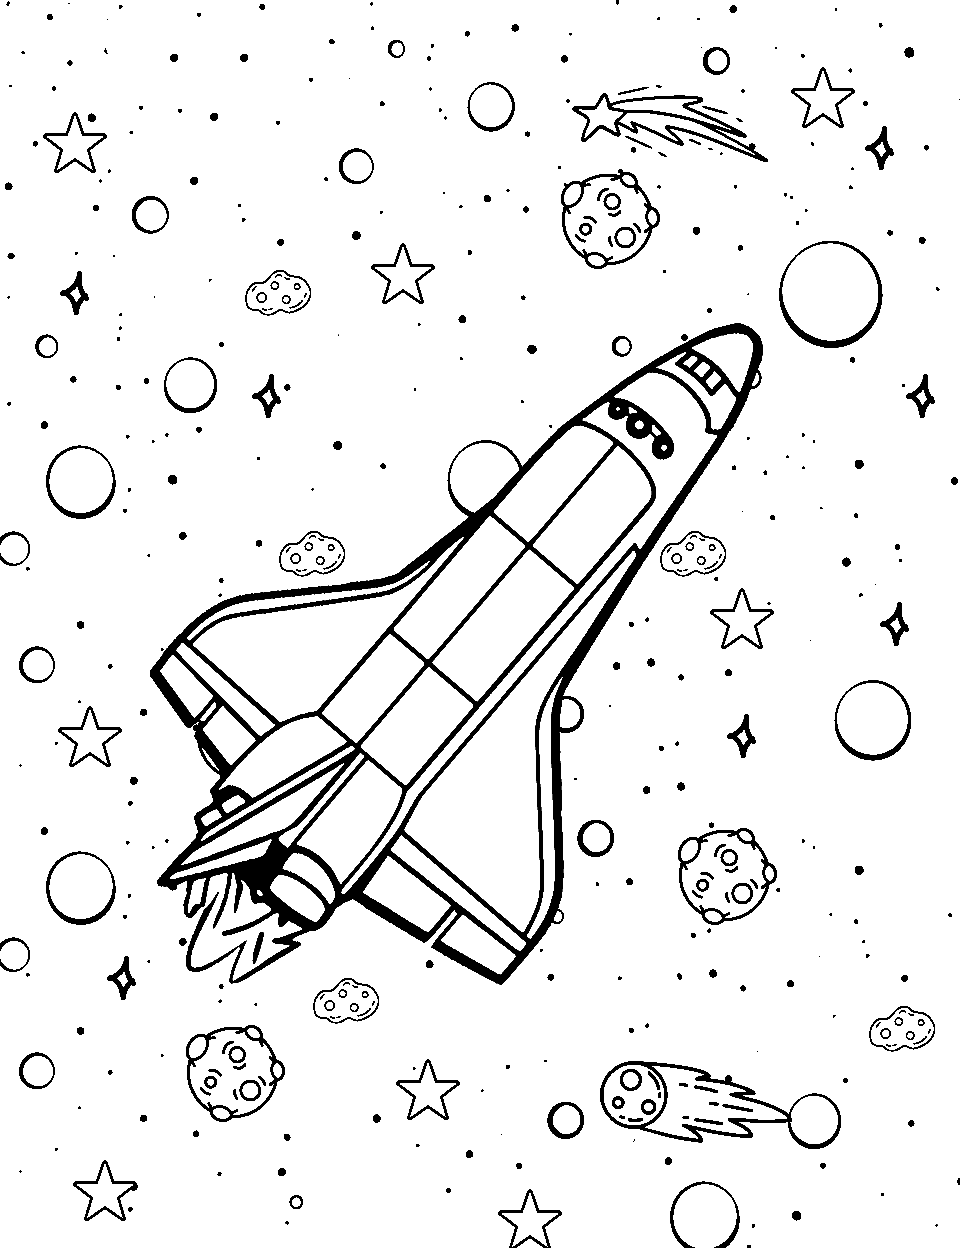 Spaceshuttle's Silent Soar Coloring Page - A space shuttle silently gliding through the universe.